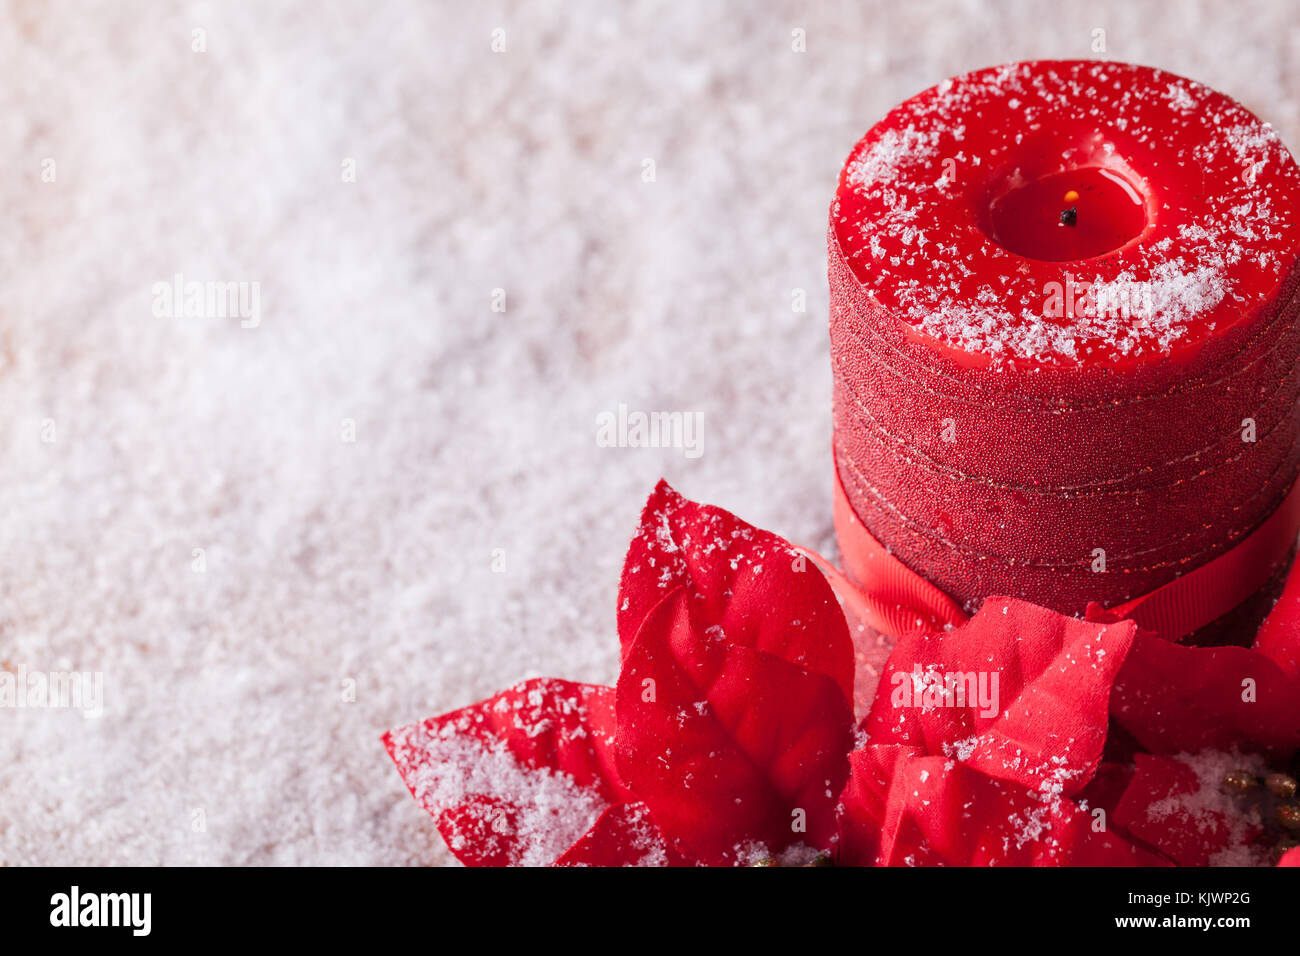 Christmas decoration, poinsettia and red decorative candle sprinkled with snowflakes. Stock Photo